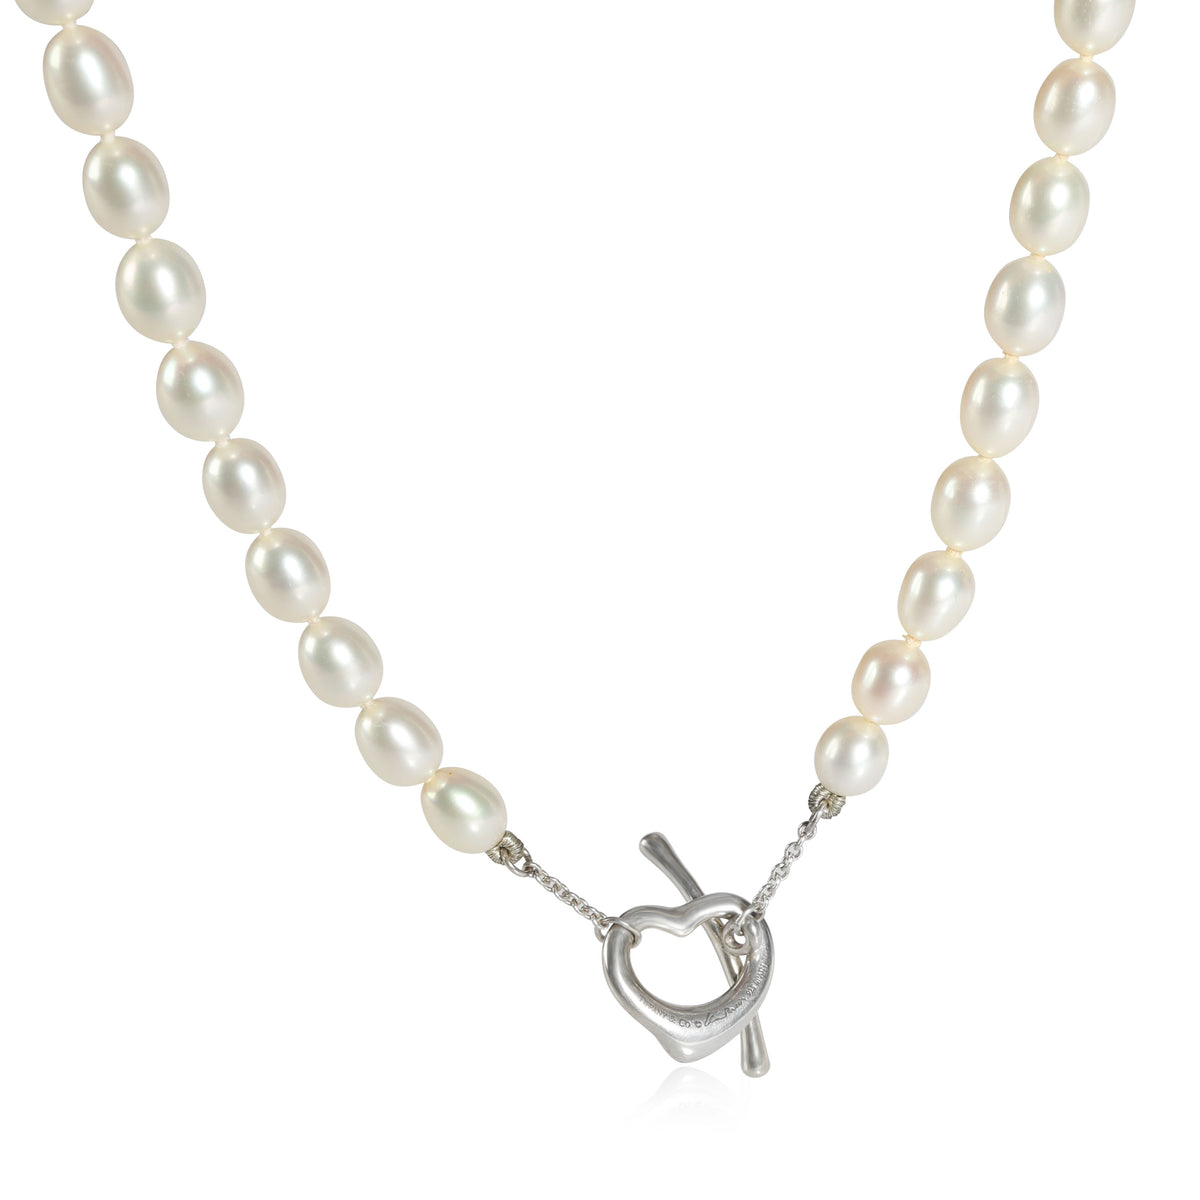 Tiffany & Co. Elsa Peretti Pearl Necklace with Heart Toggle in Sterling Silver